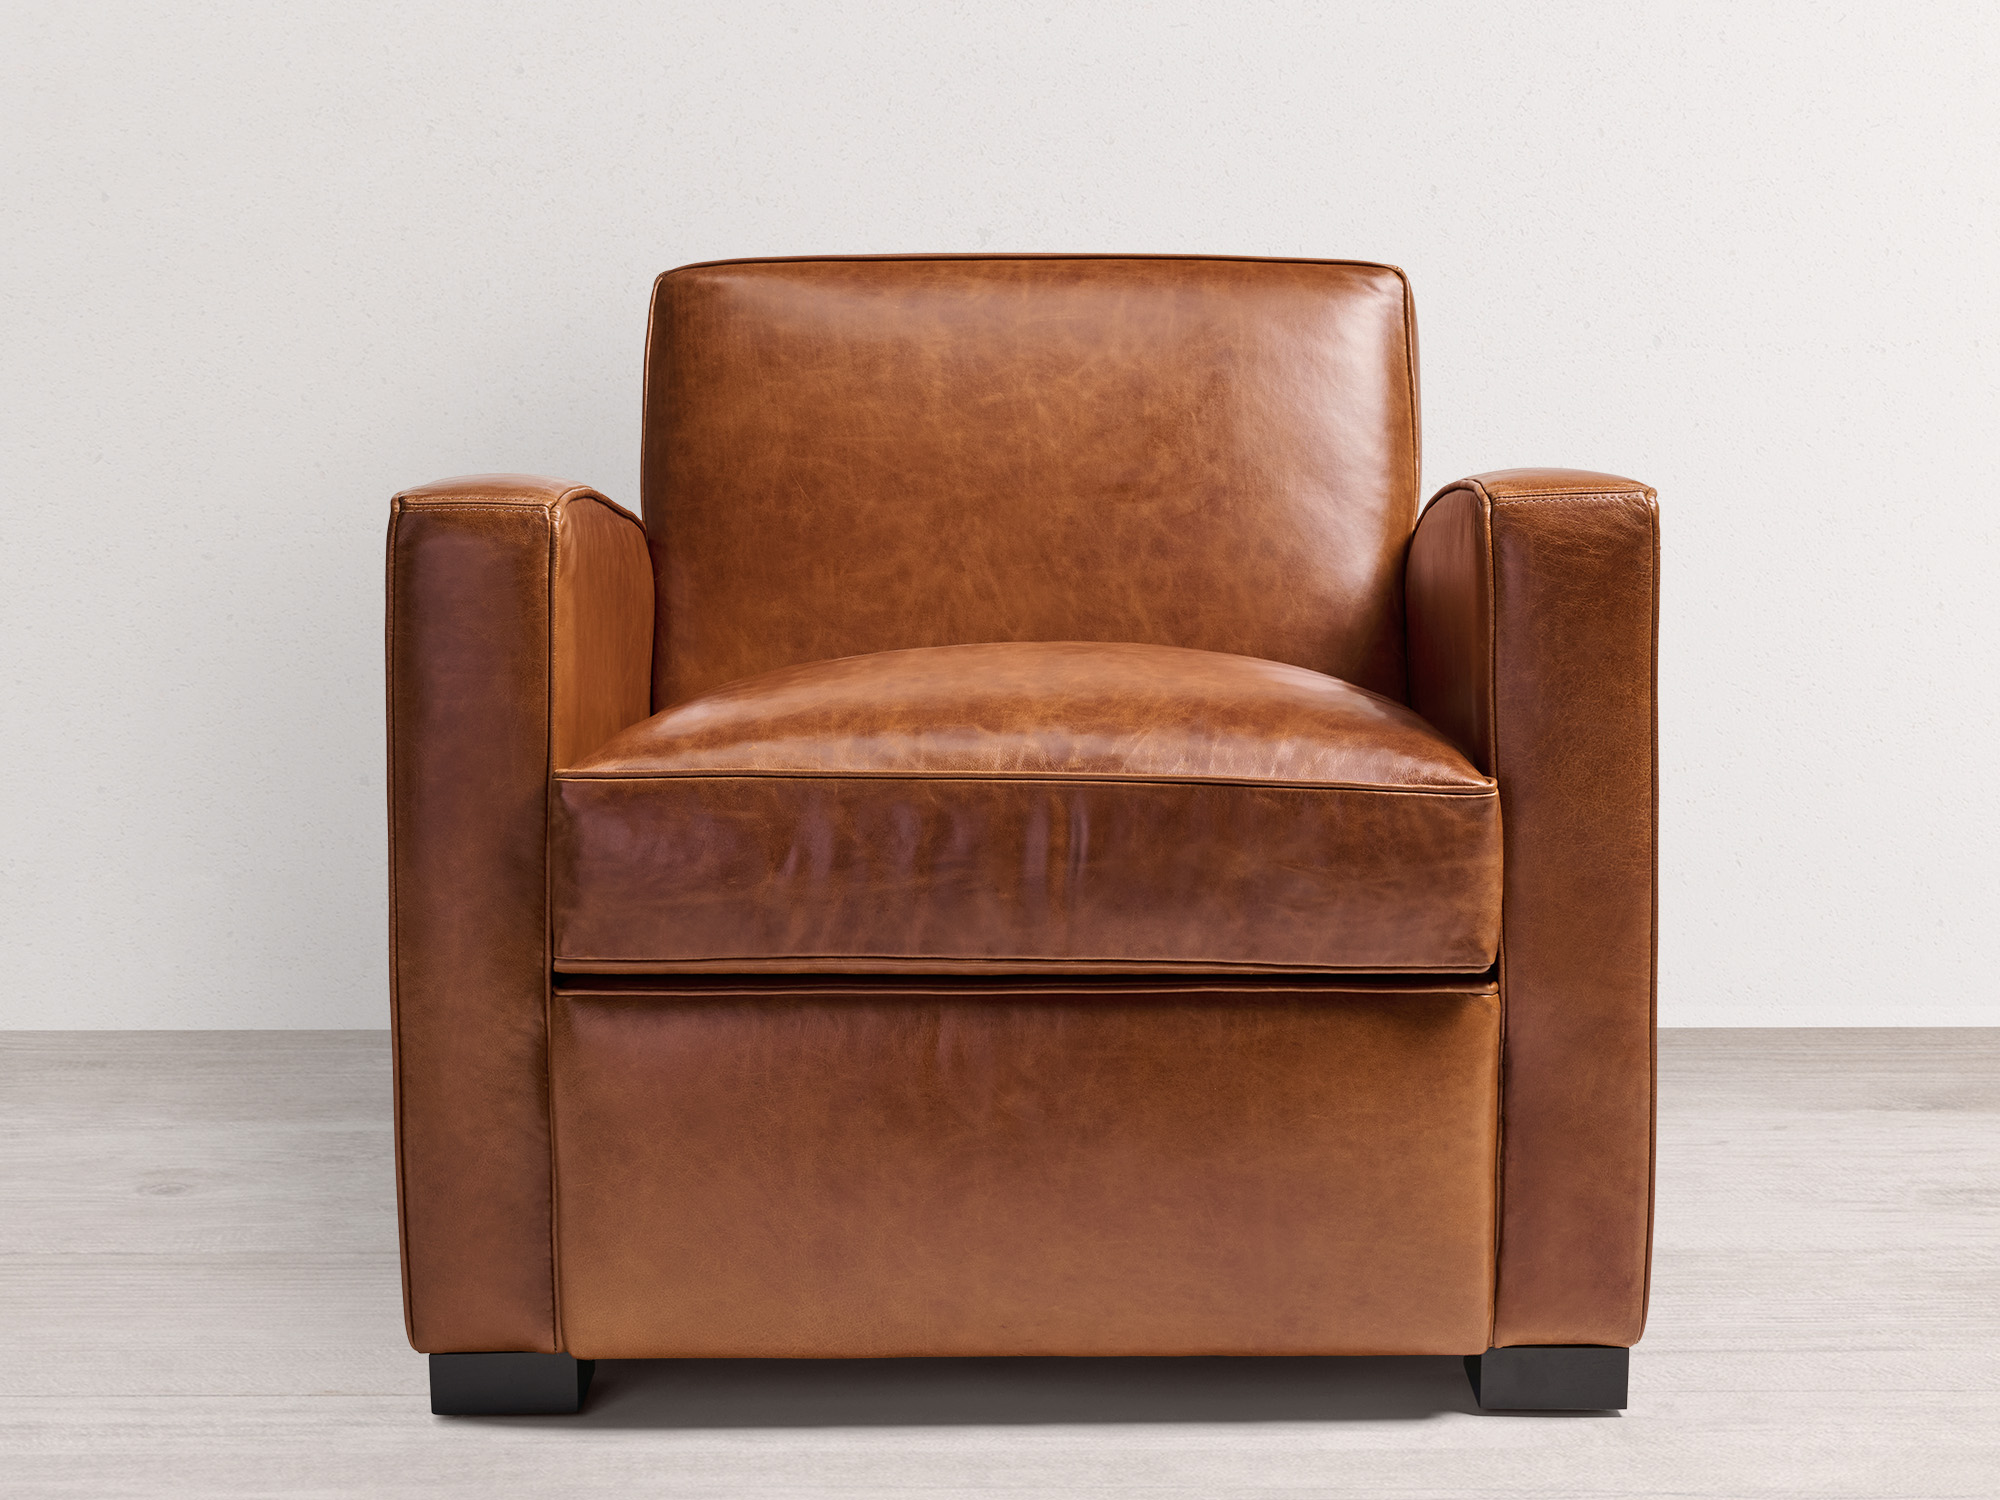 In stock - Atlas Leather Chair in Mont Blanc Caramel Leather - One only - front